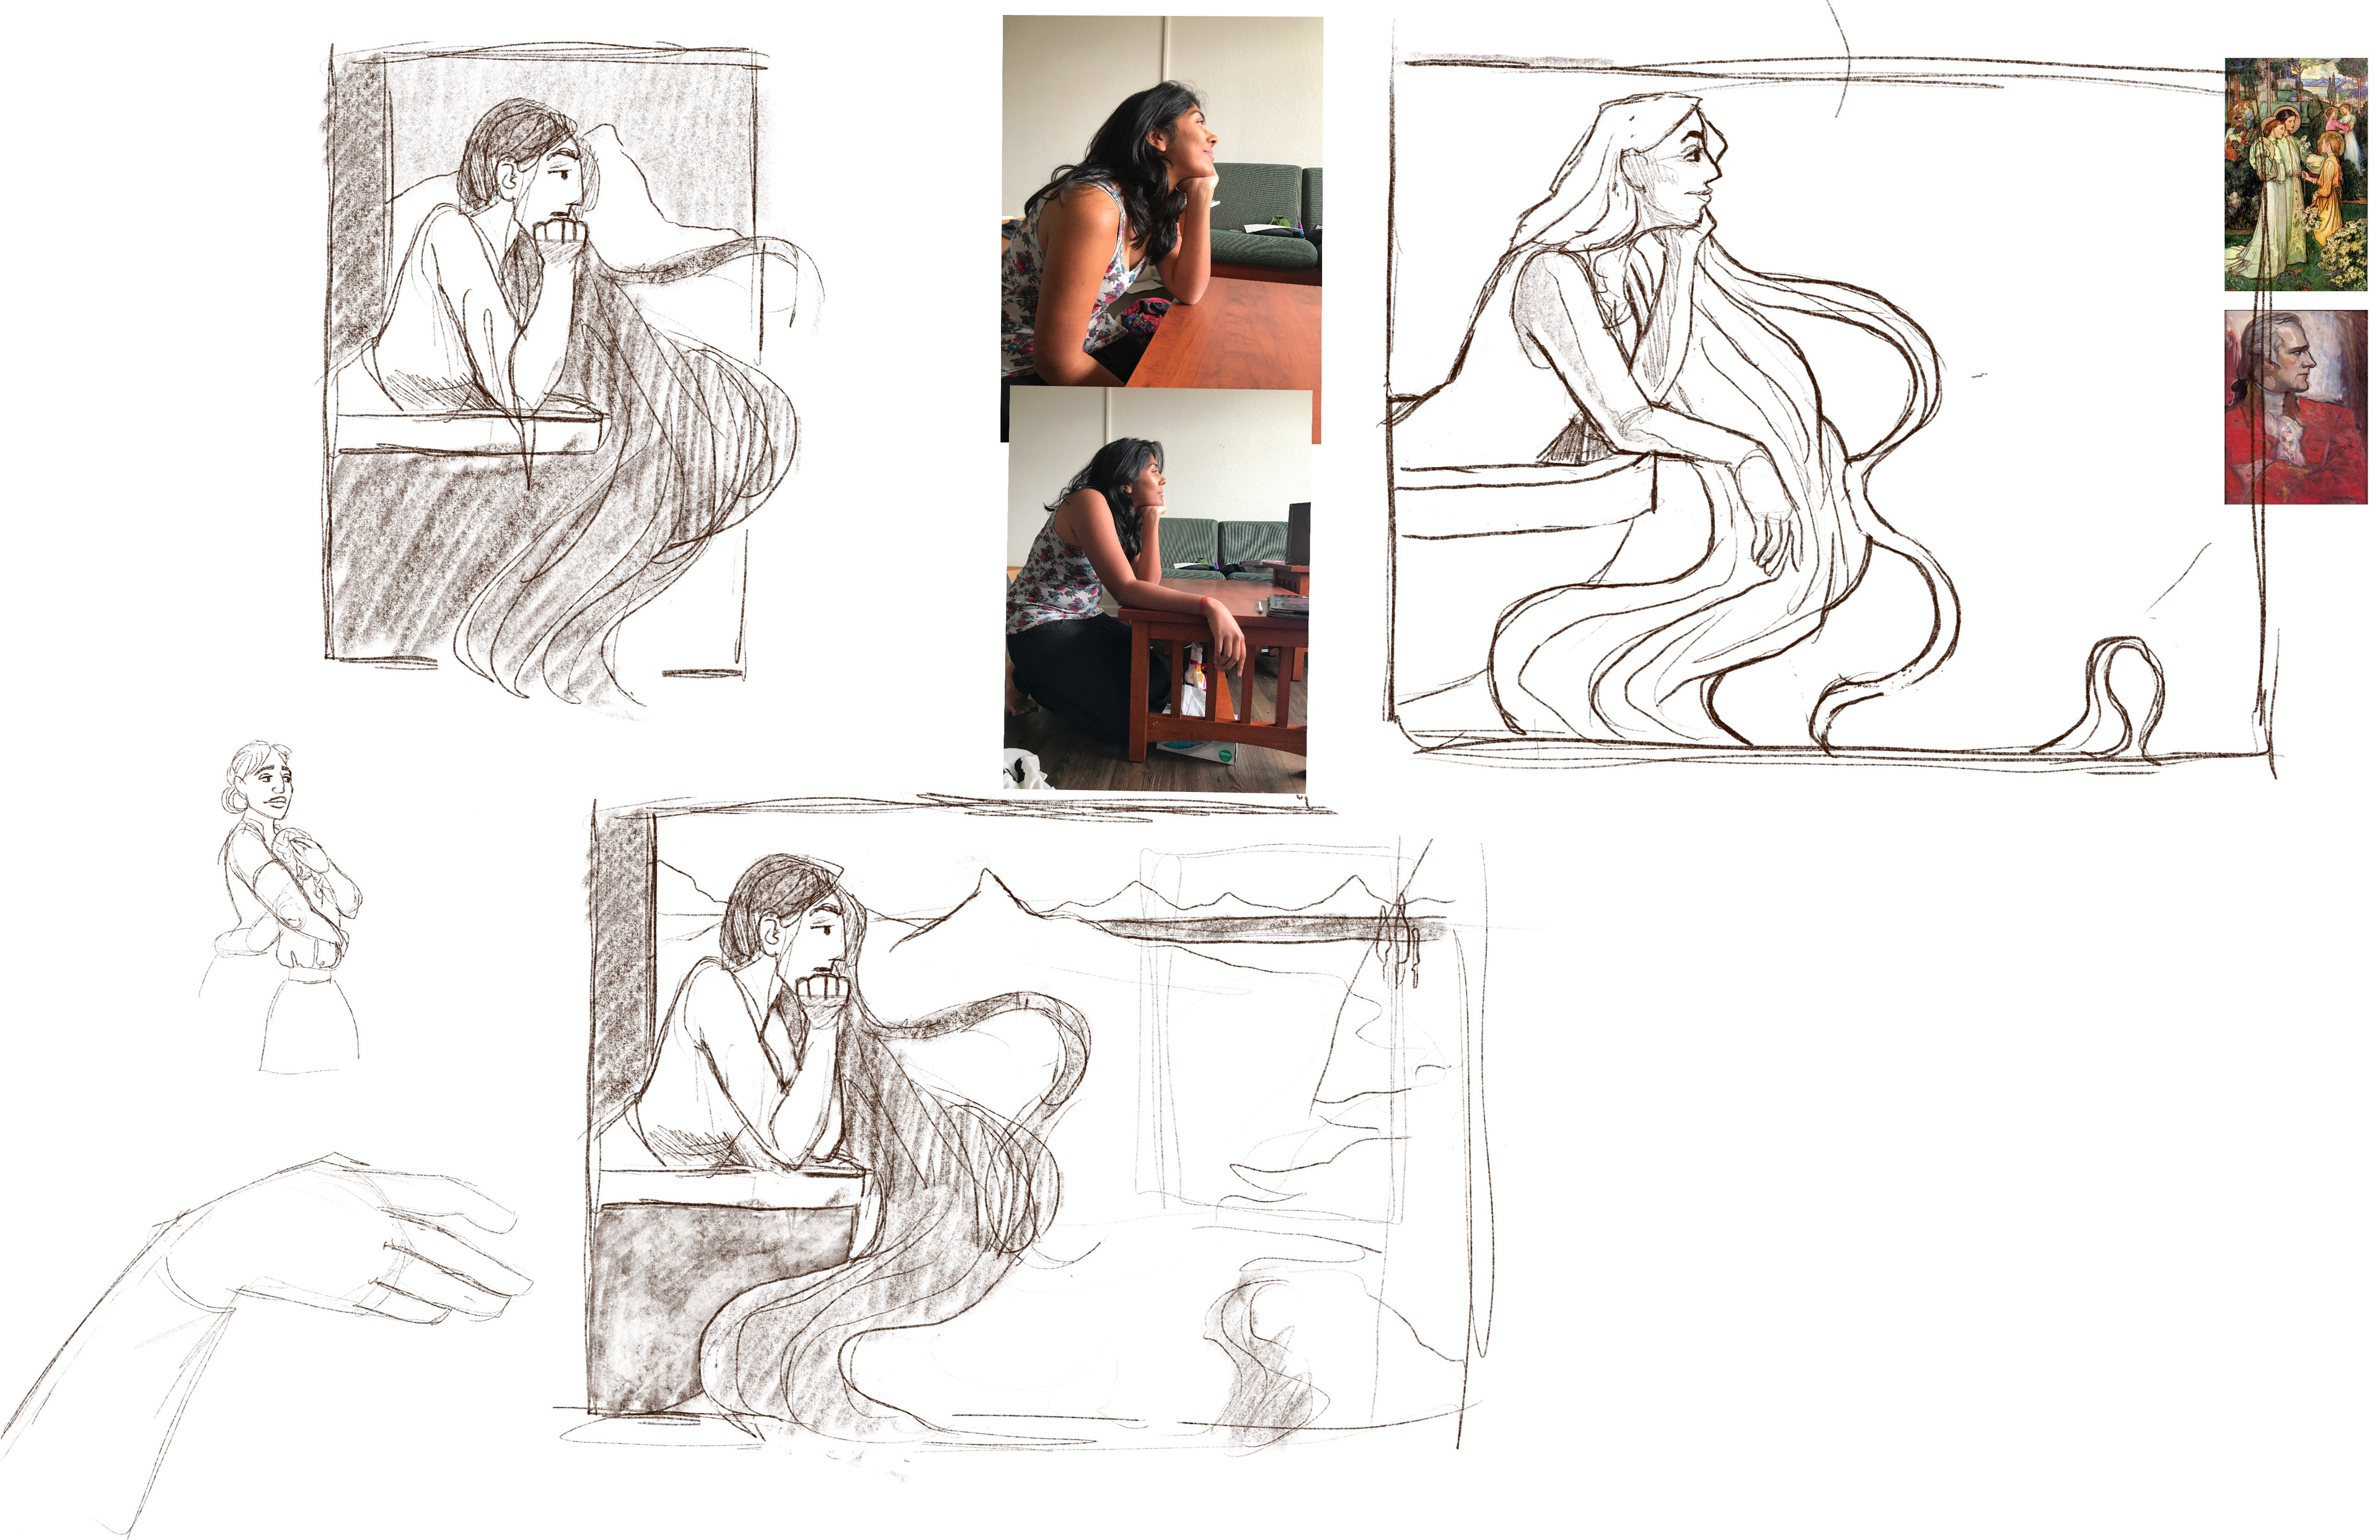 Original Thumbnail sketches (top left and middle)

I then shot reference and completed a refined sketch (right)